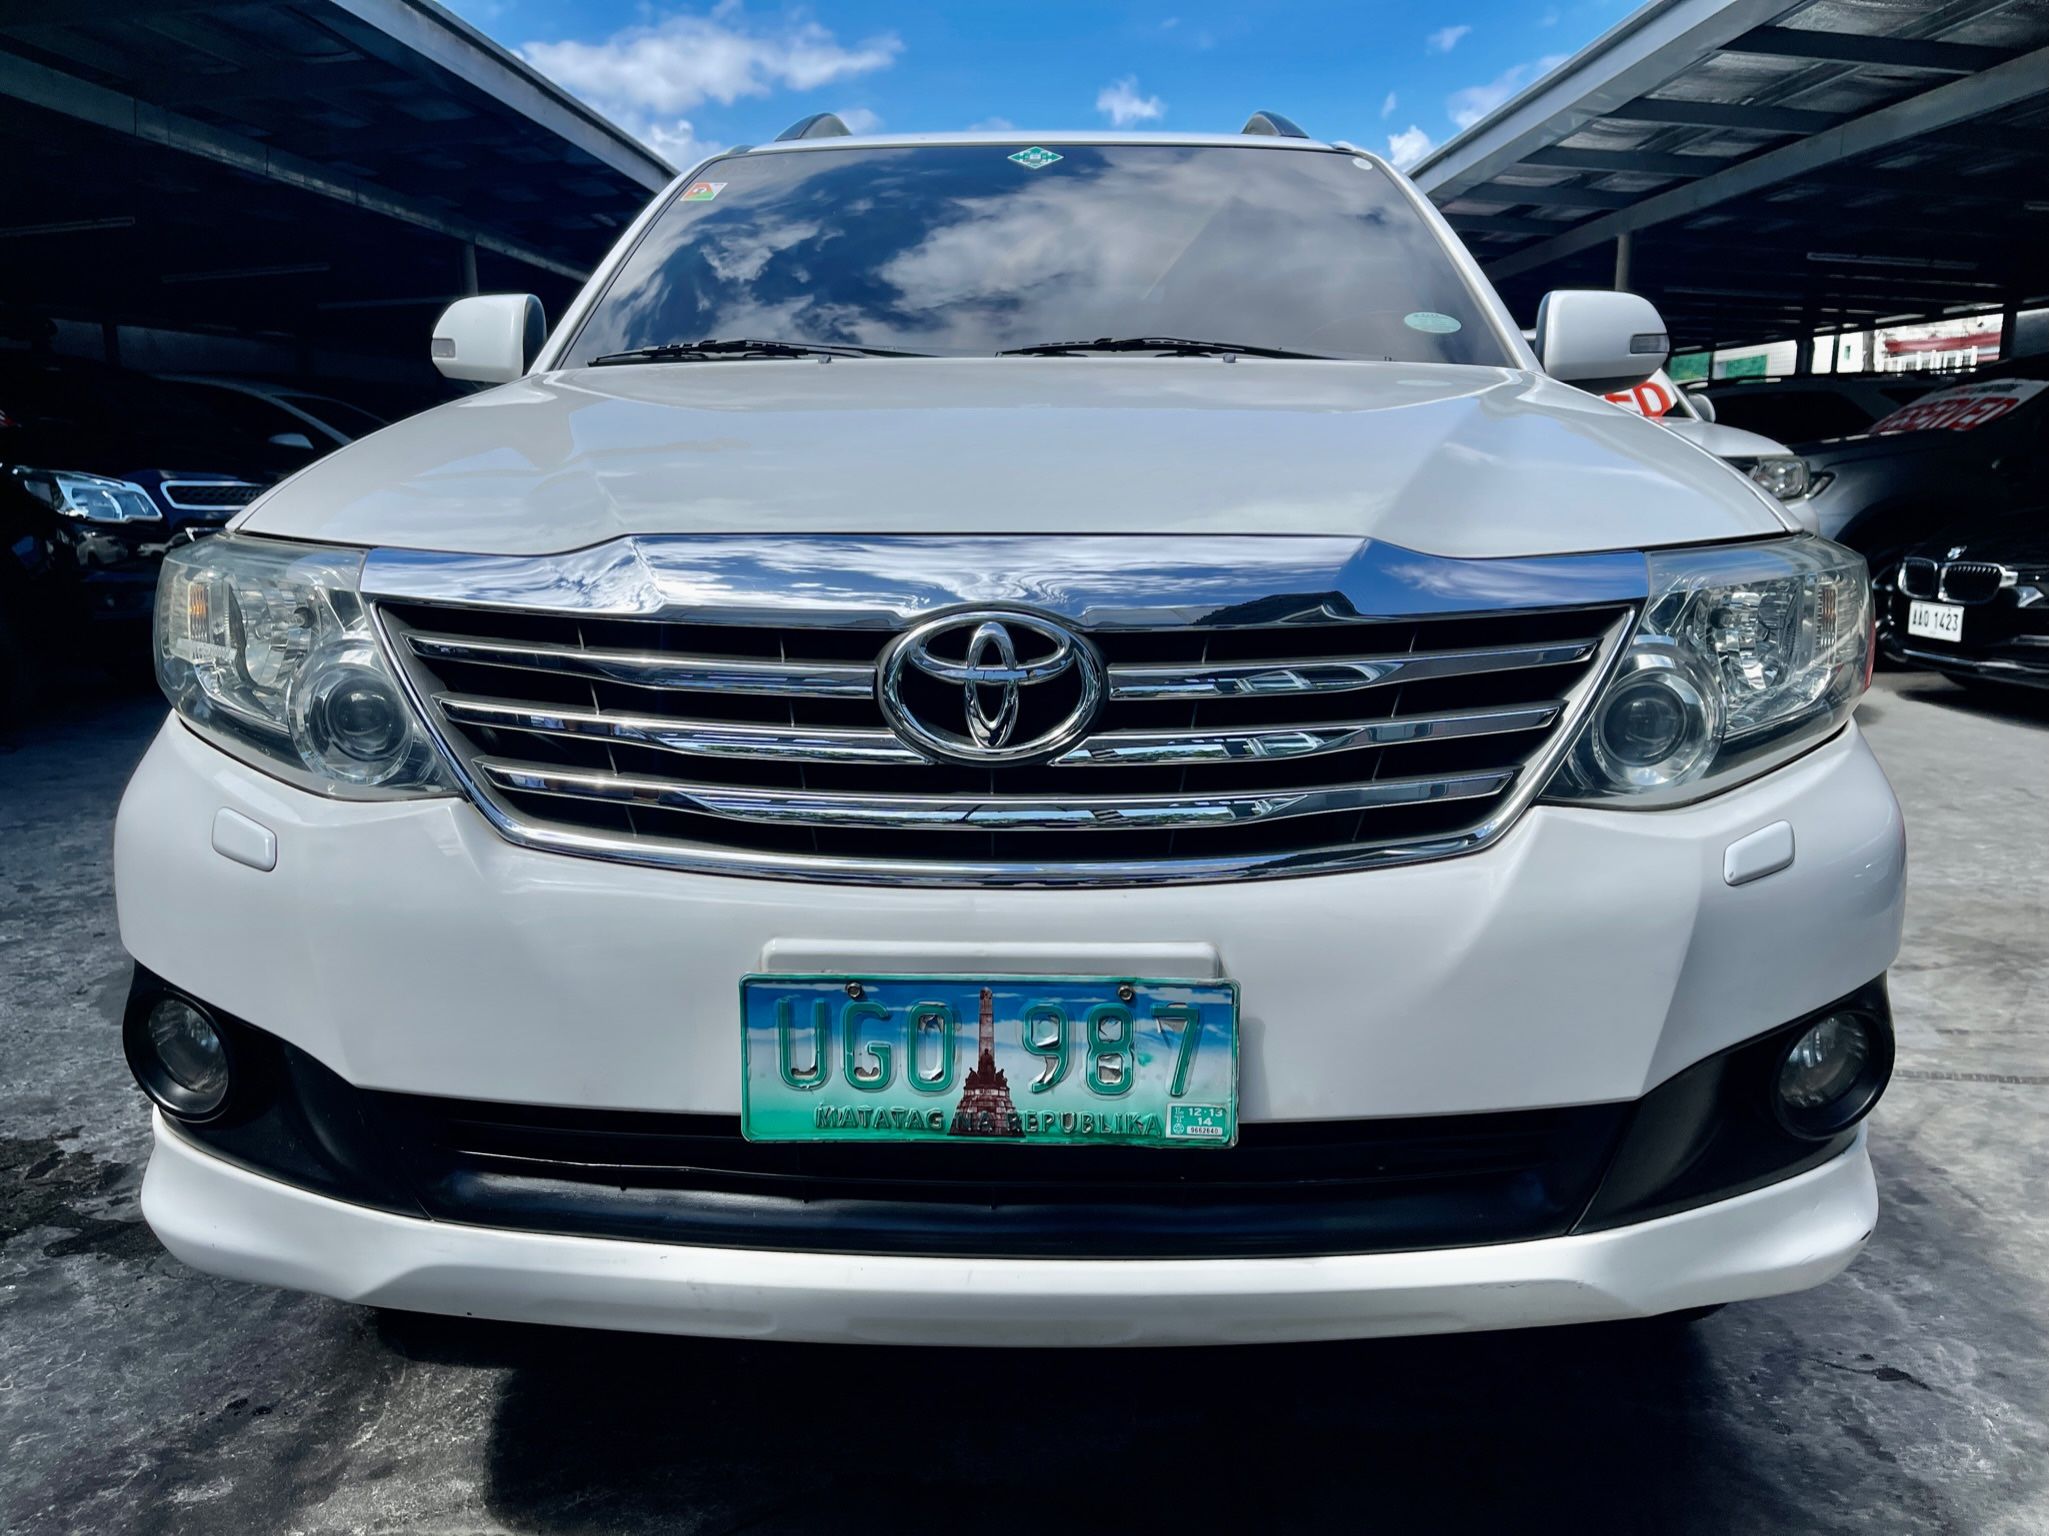 Used 2012 Toyota Fortuner Dsl AT 4x2 2.5 G